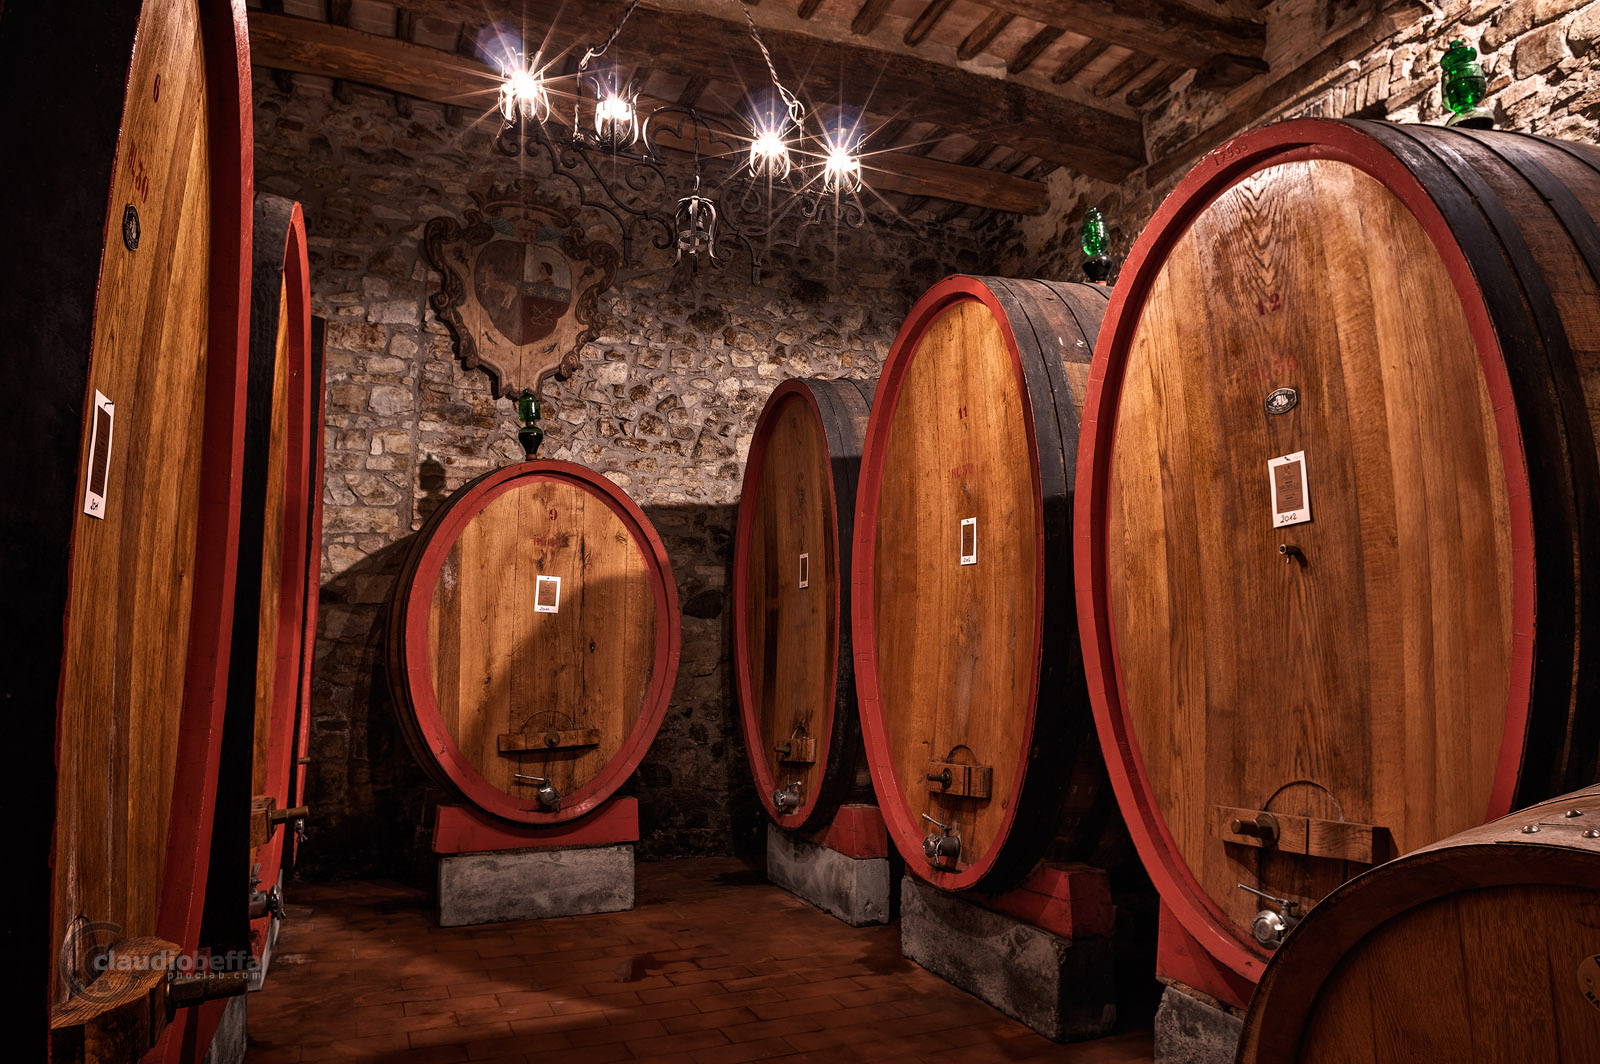 Cellar, Casks, Ancient, Wine, Wine-making, Costanti, Tuscany, Toscana, Val d'Orcia, Montalcino, Italy, Italia, Ancient wine cellars of Tuscany